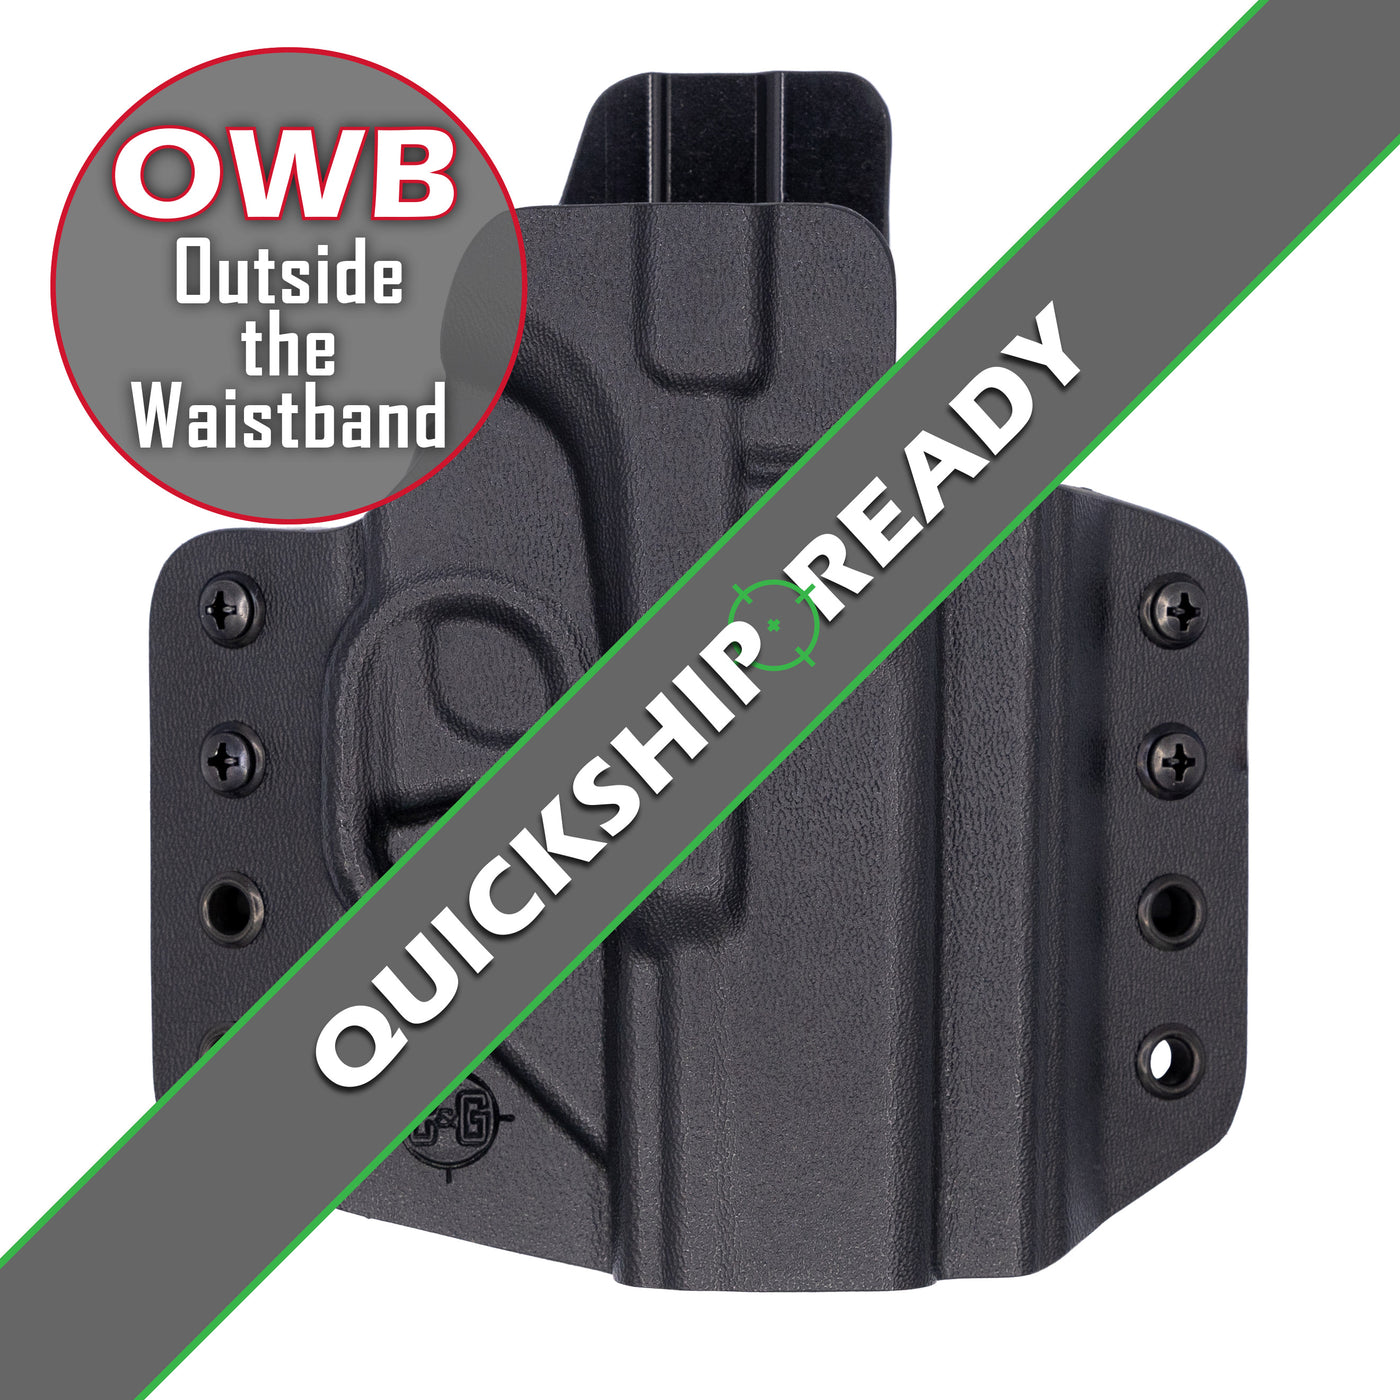 This is the C&G Holsters Quickship Covert outside the waistband Covert series holster